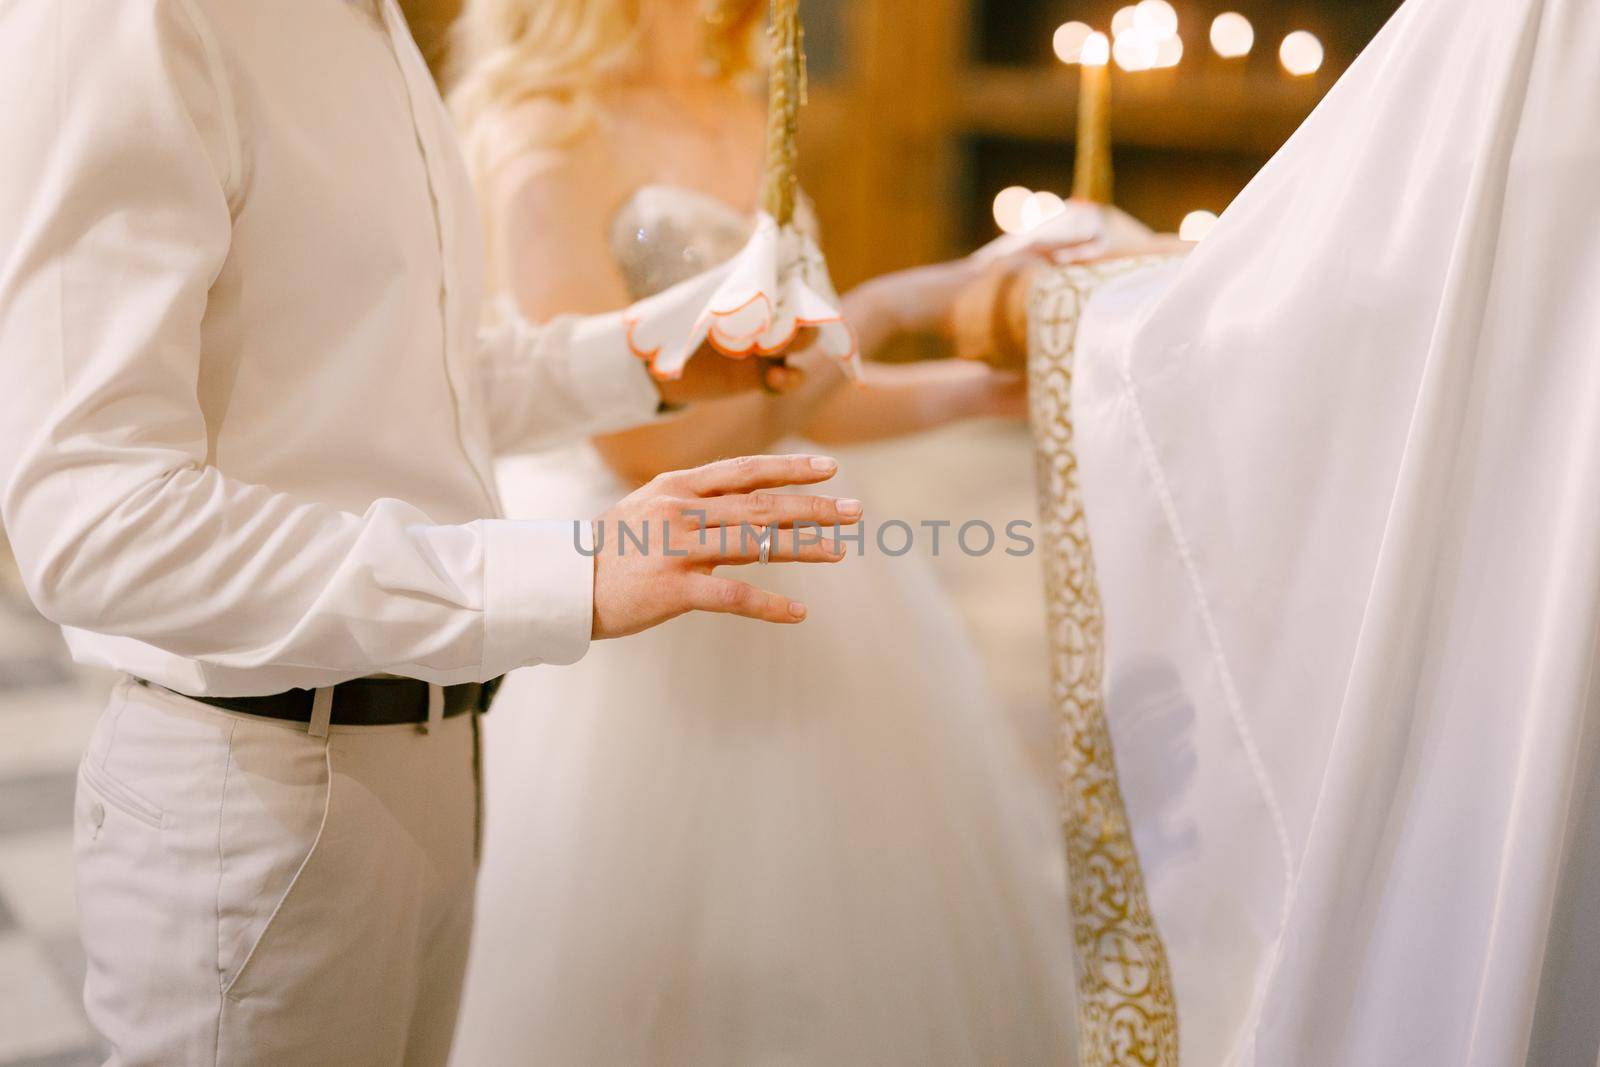 A priest in a white habit marrying the bride and groom in the church of St. Nicholas in Kotor by Nadtochiy